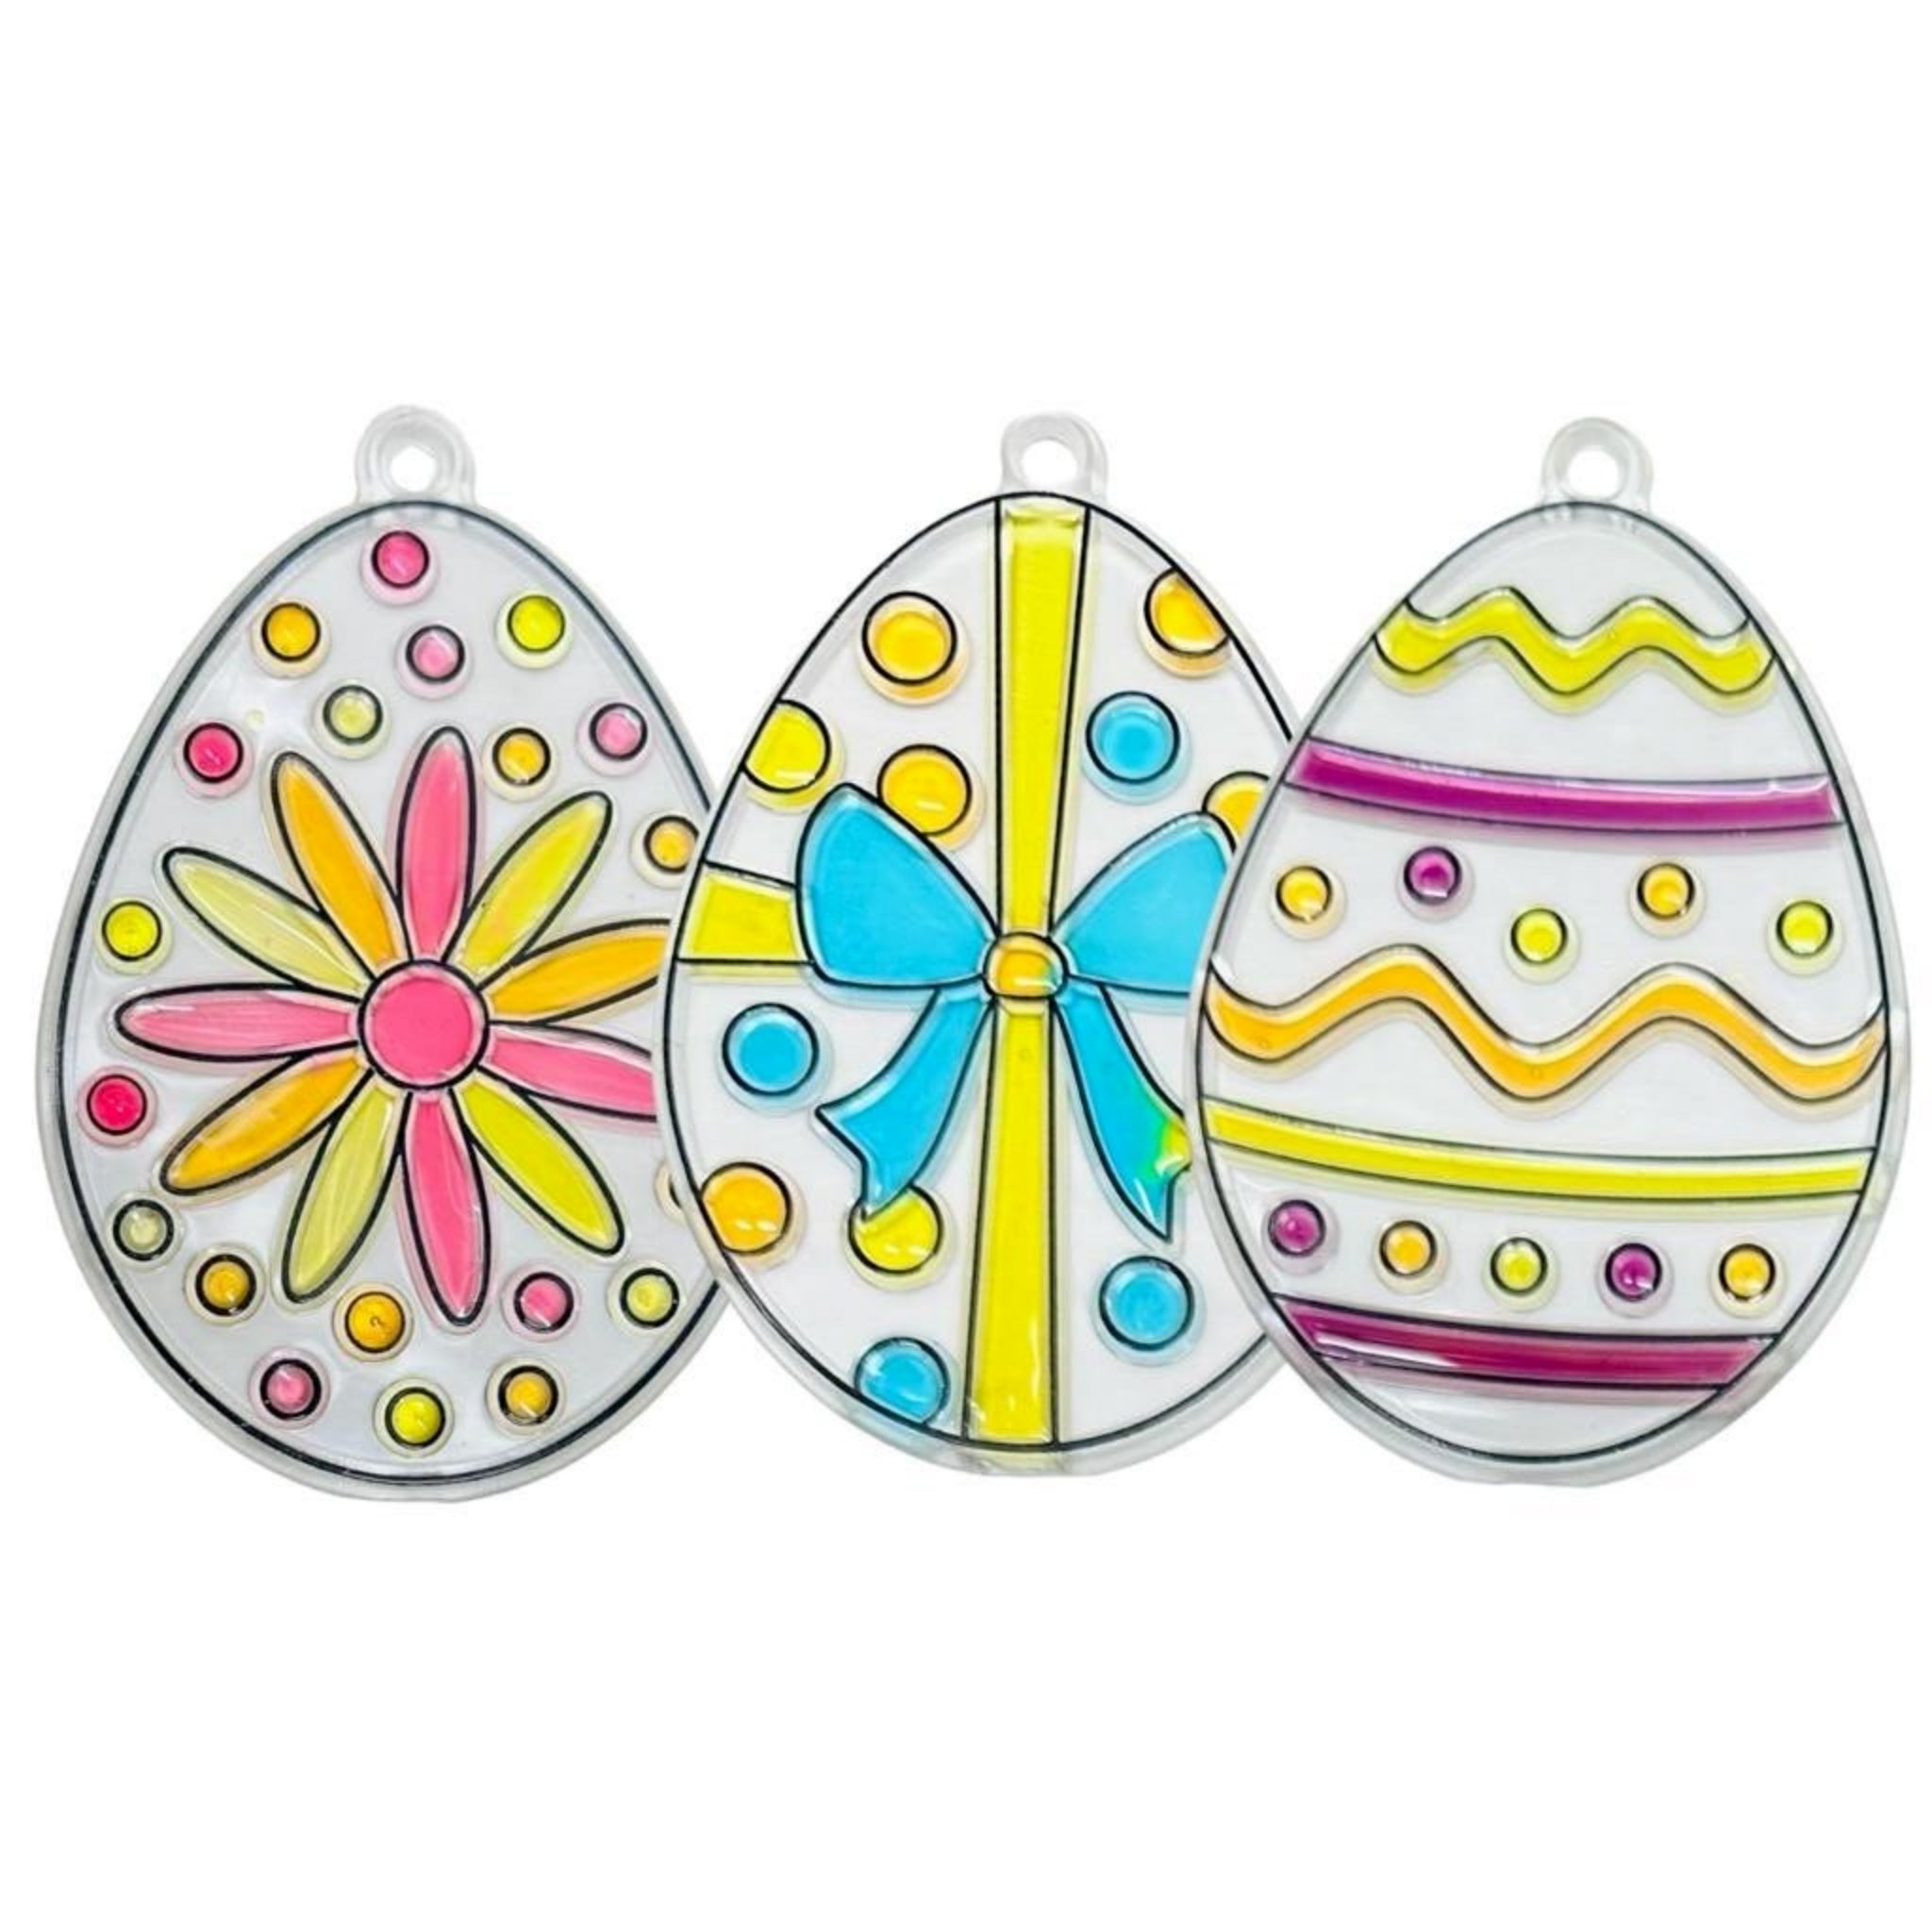 Beclen Harp Paint Your Own Easter Suncatcher Decorations Easter Crafts for Kids - Pack of 3